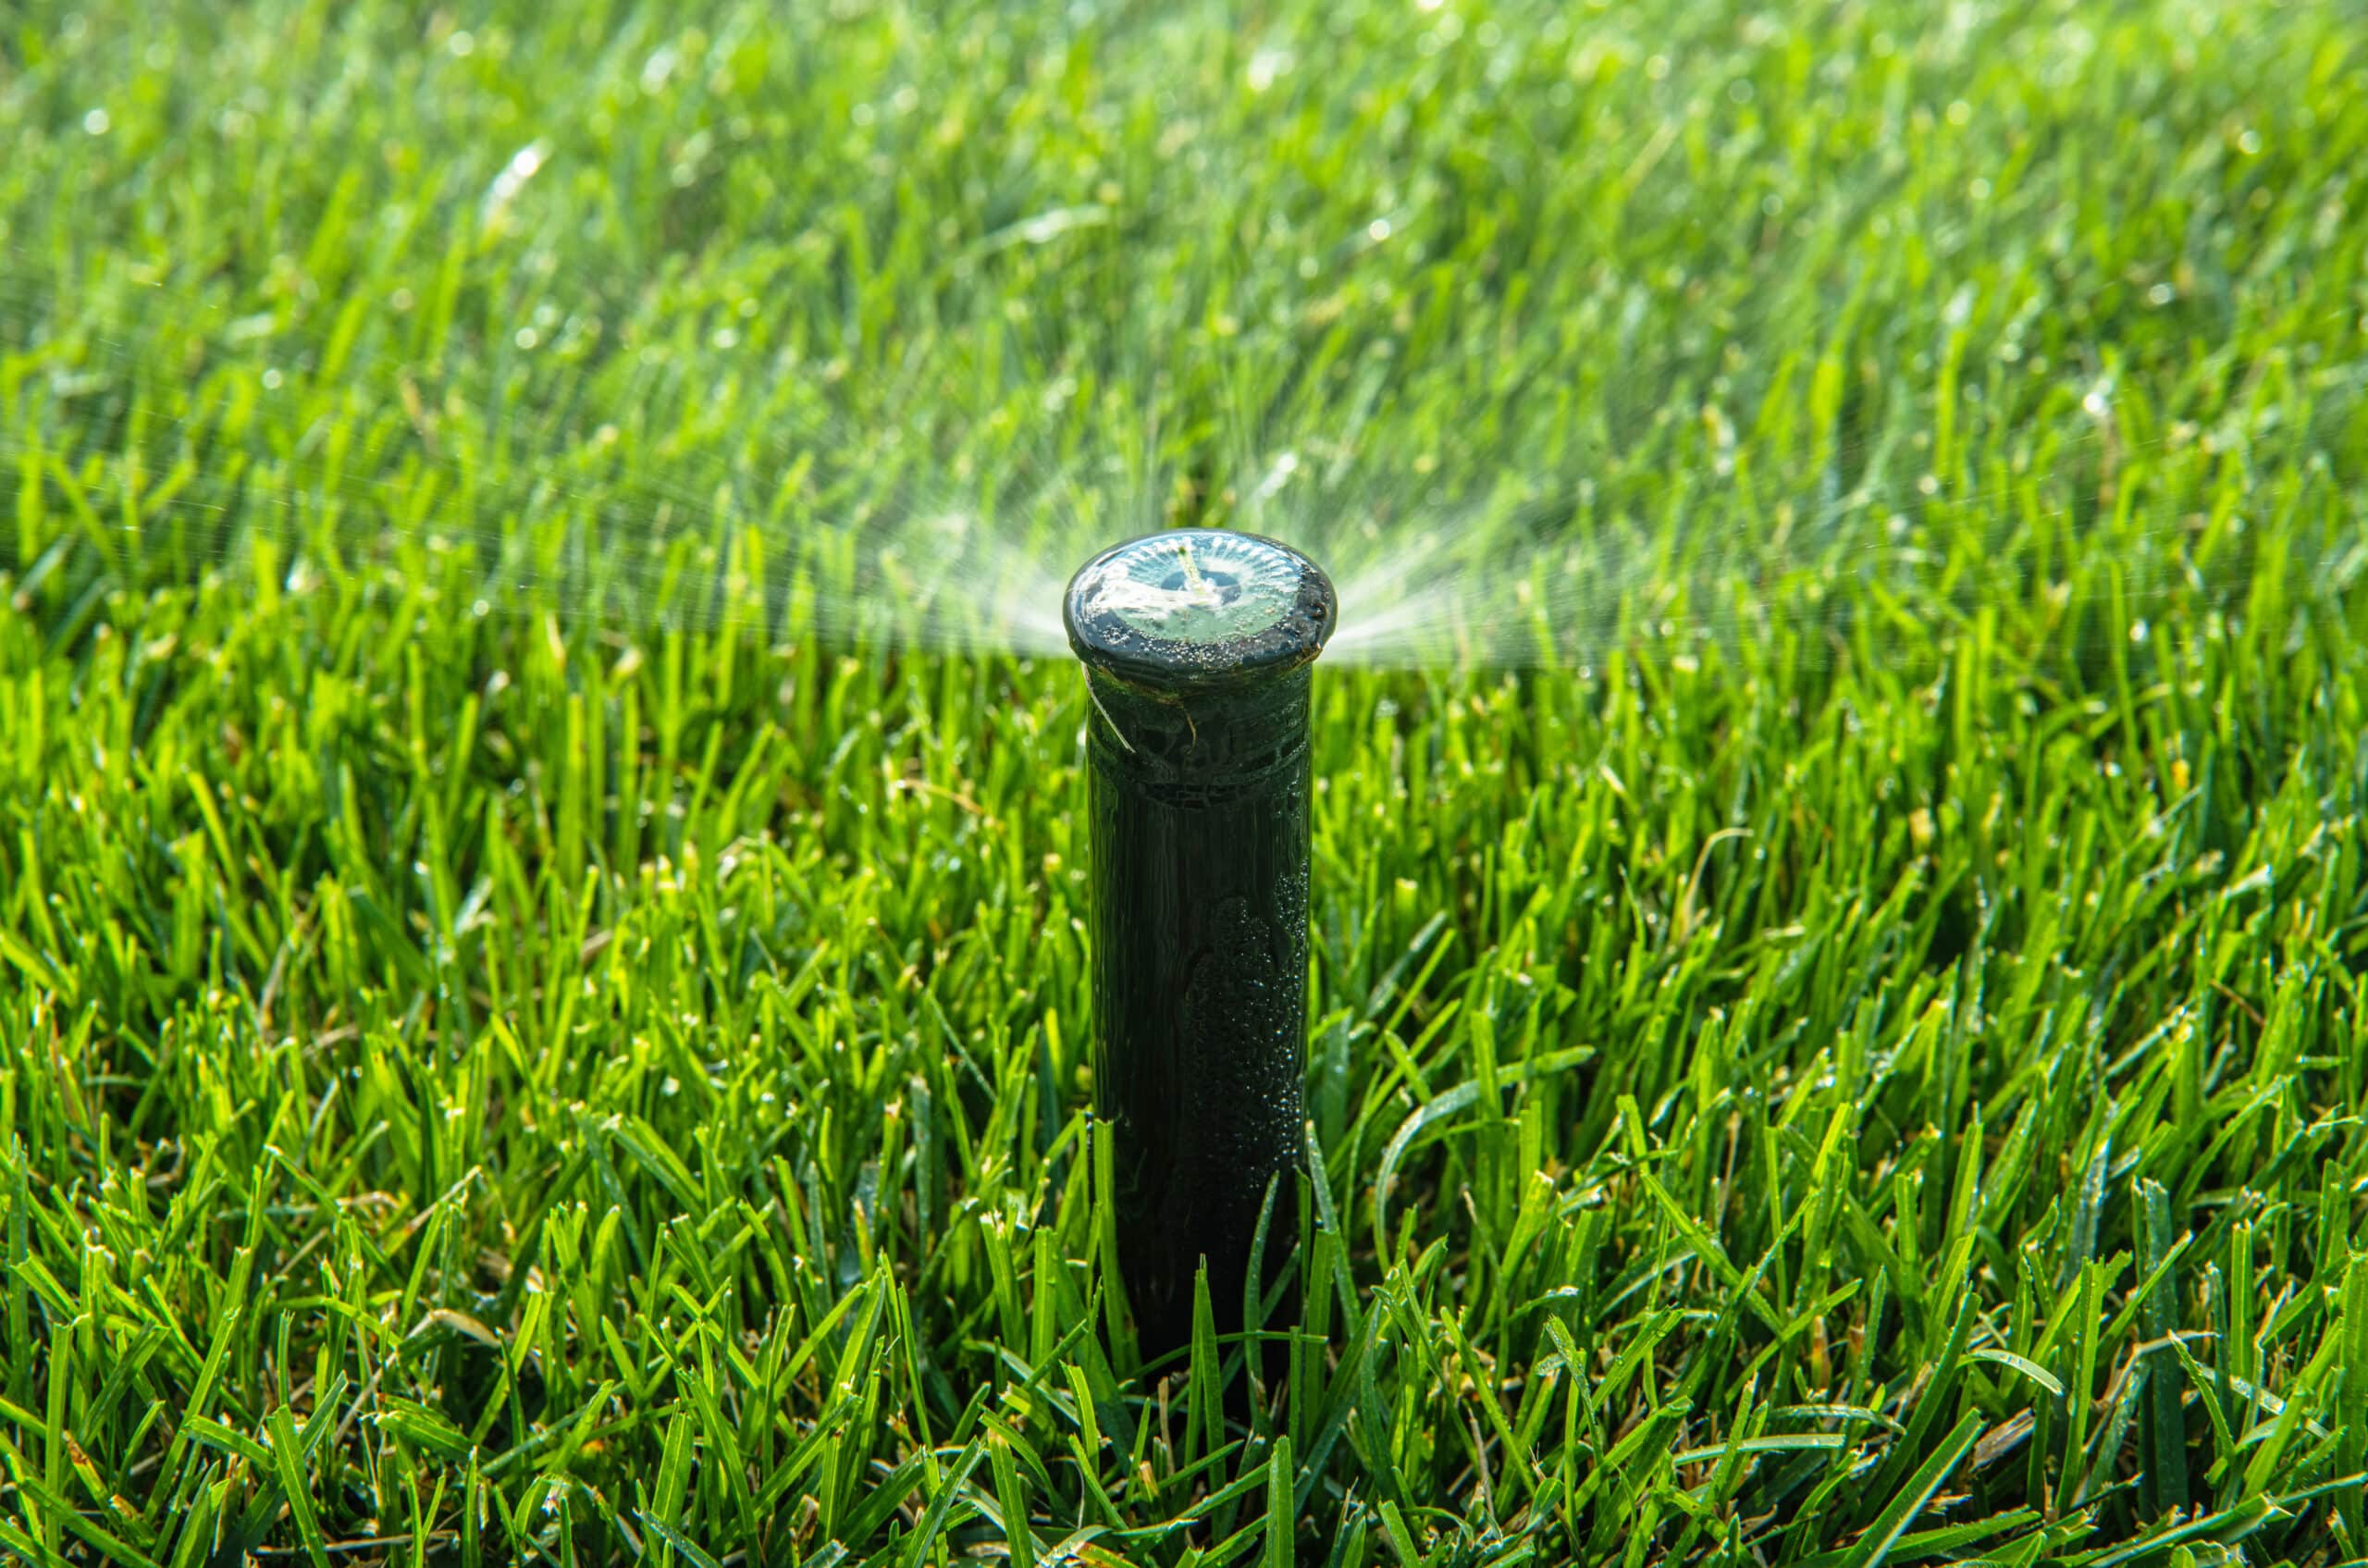 Irrigation Installation 9 | automatic pop up lawn sprinkler close up 2022 10 24 18 26 36 utc scaled